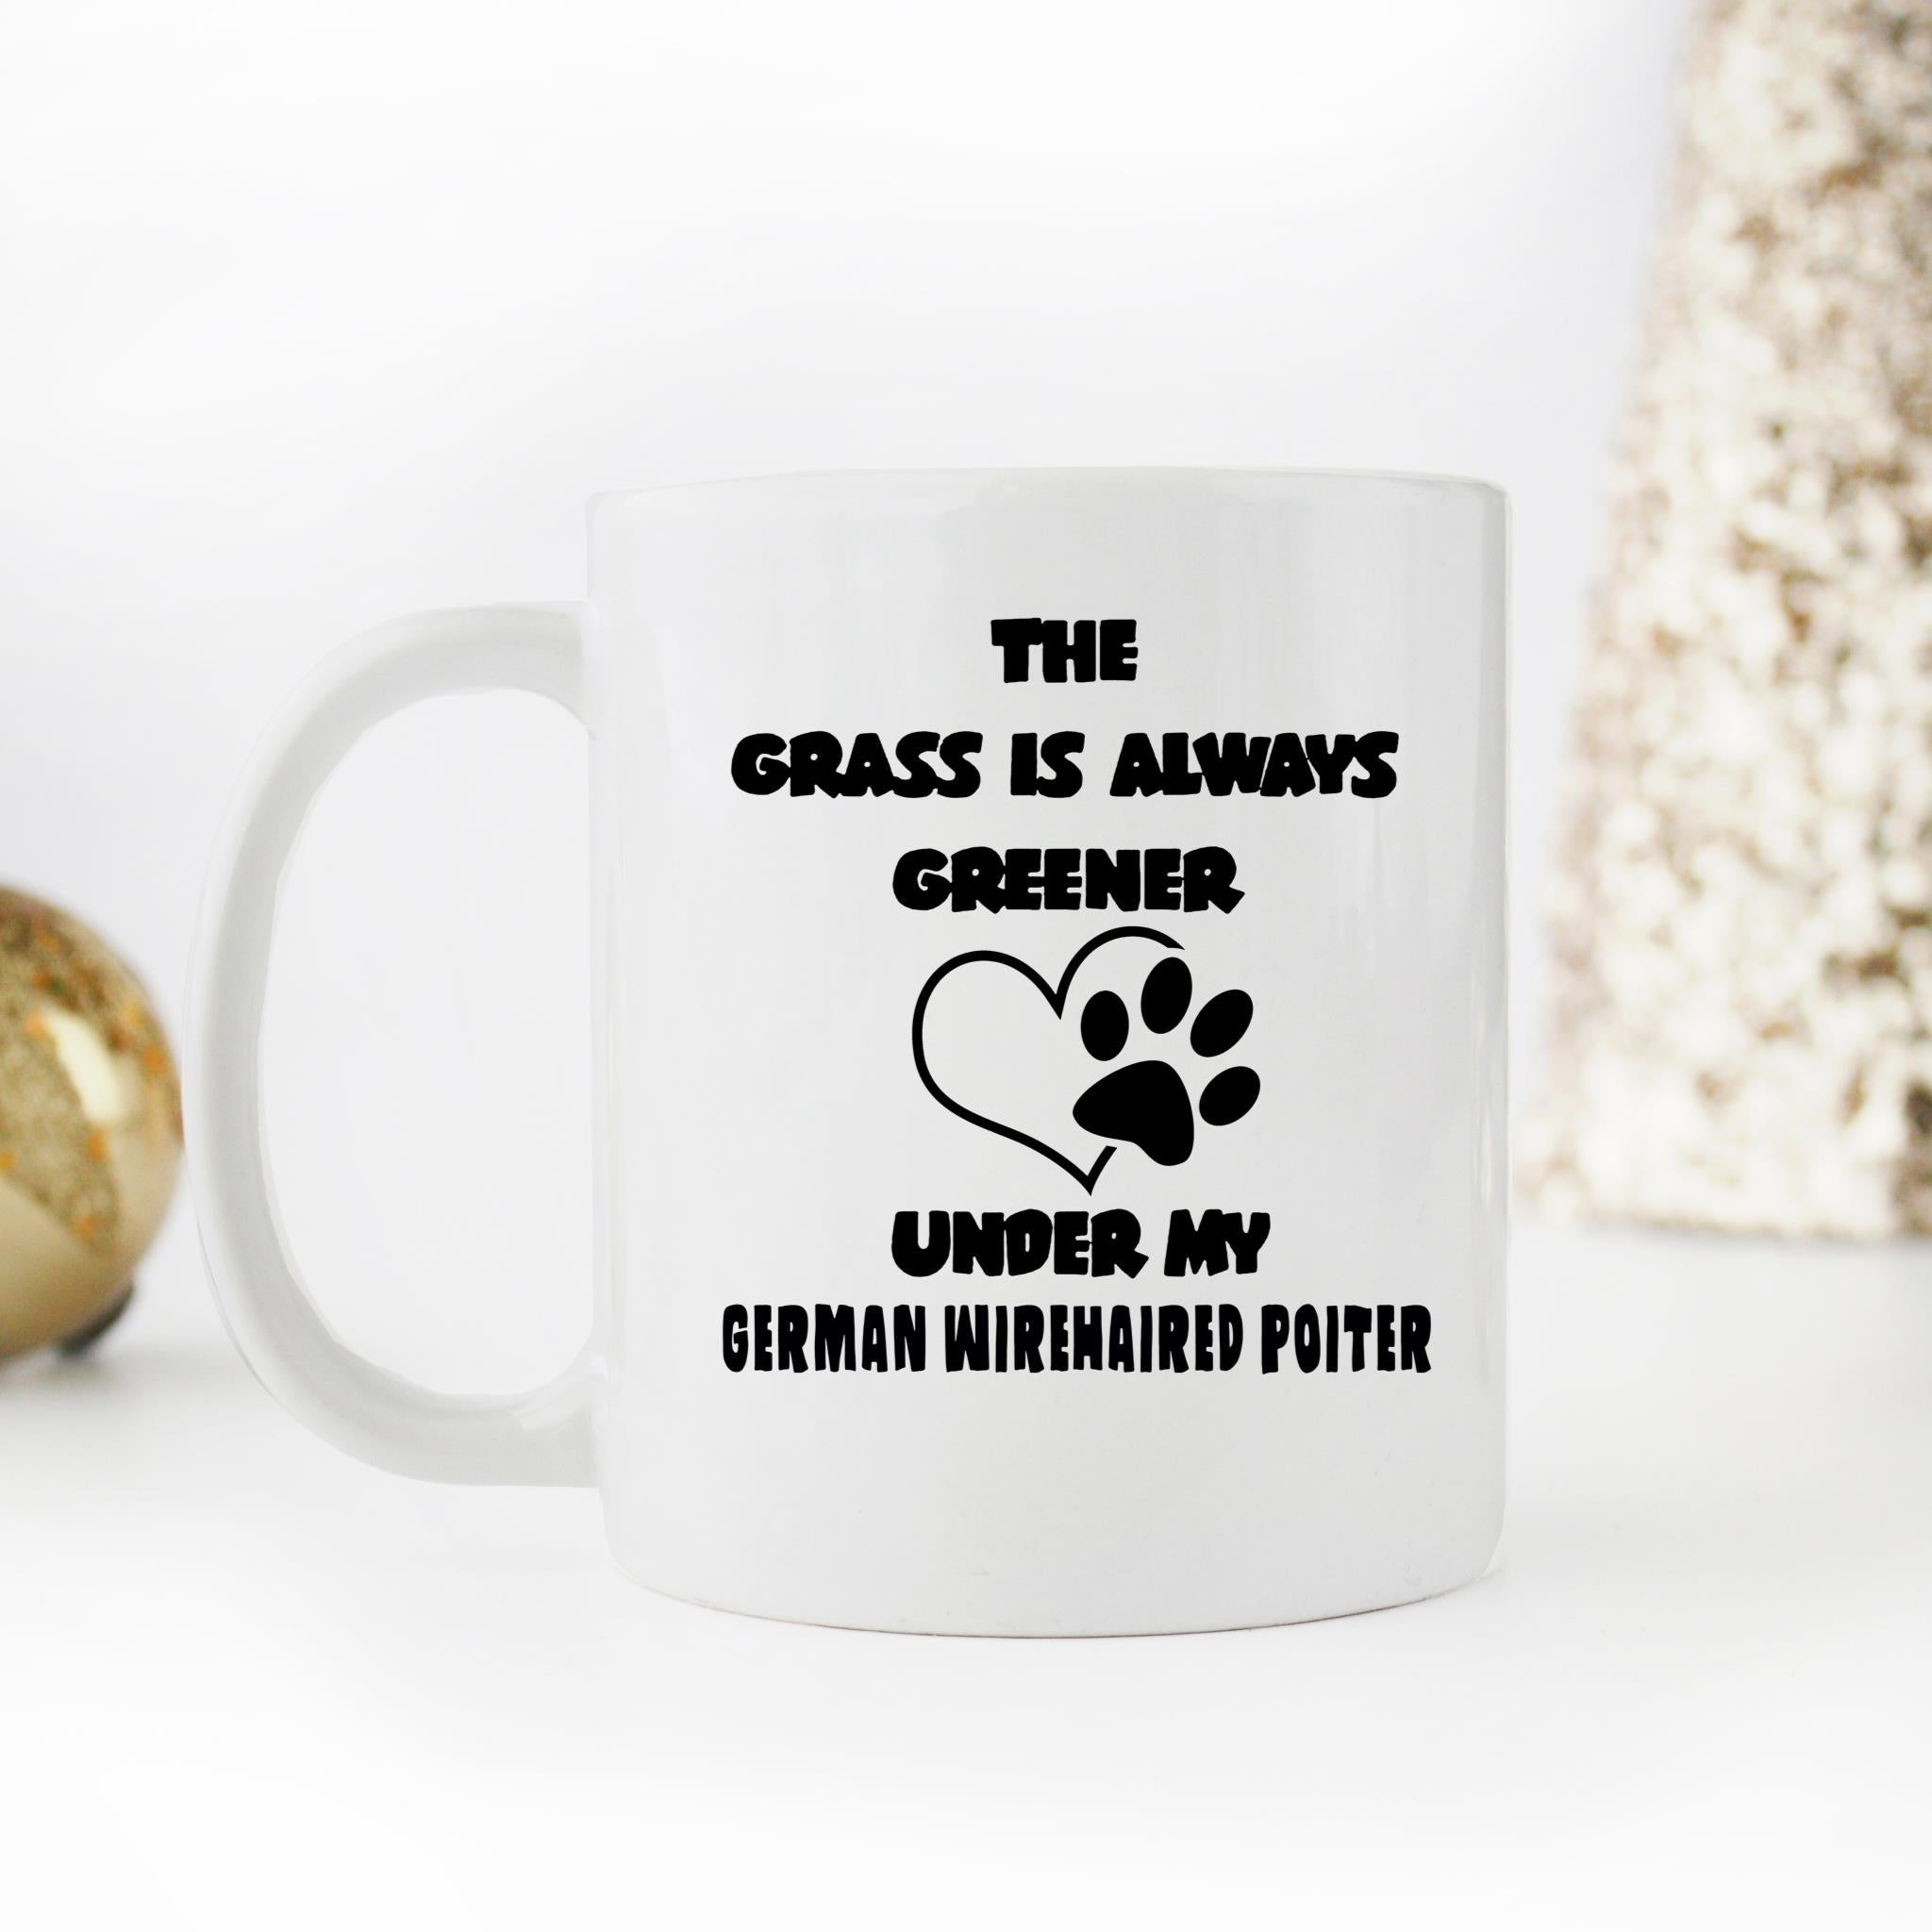 Skitons Funny Ceramic Novelty Coffee Mug The Grass Is Always Greener Under My German Wirehaired Poiter Dog Funny Sarcastic, Dog Lover LX0WXLO